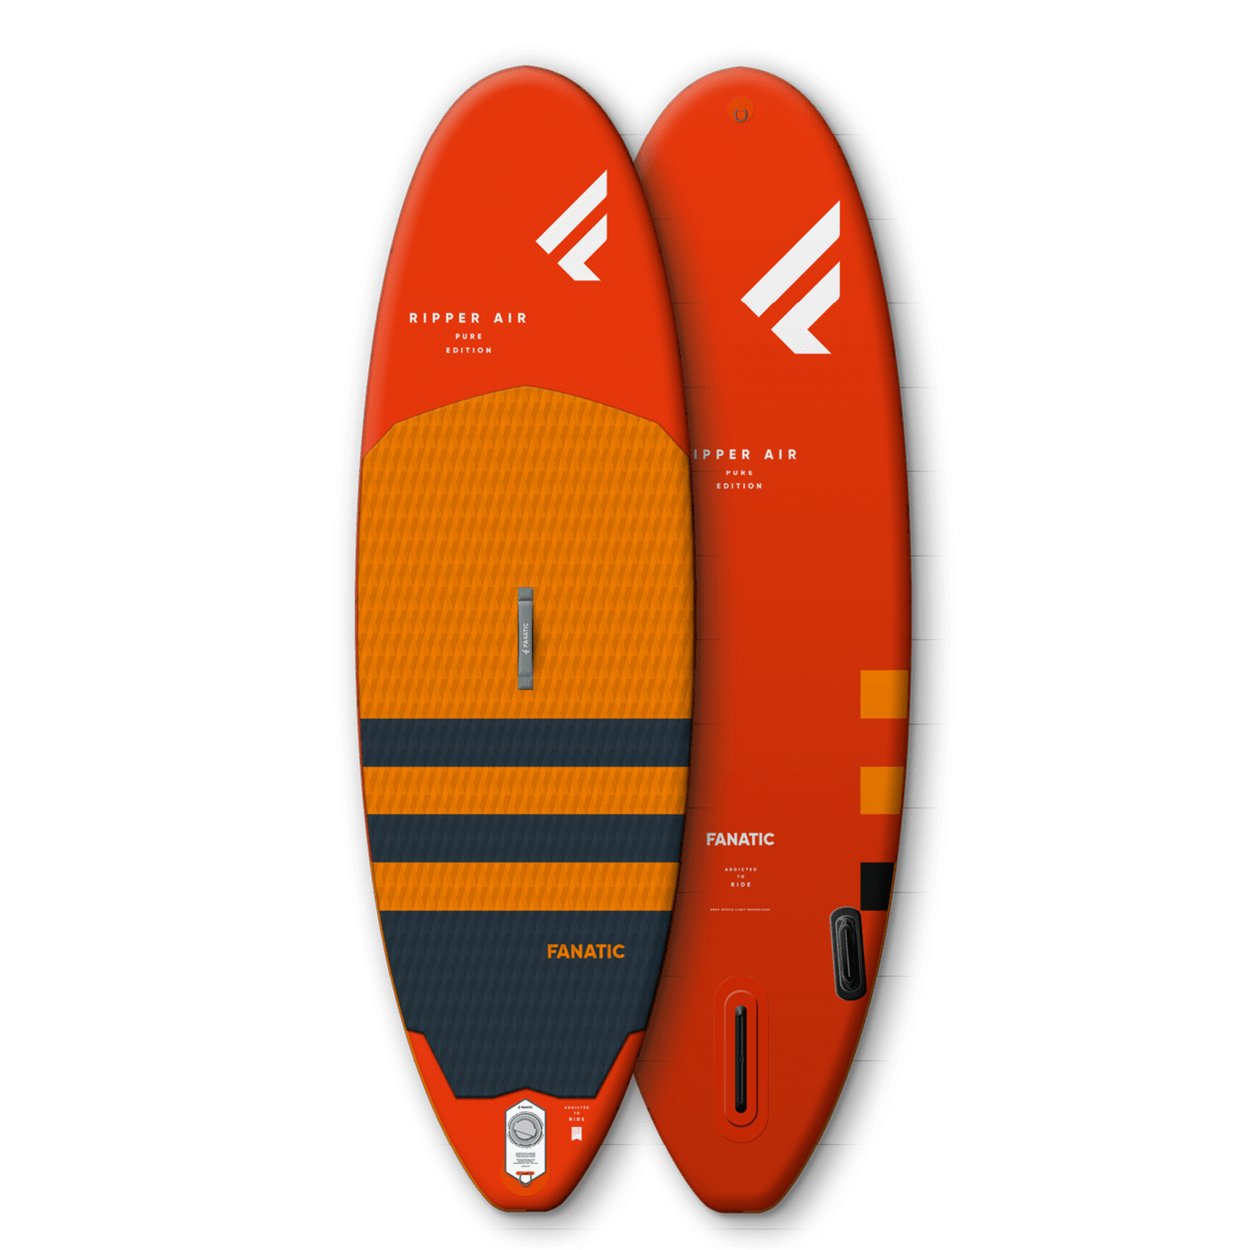 Fanatic Ripper Air 2022 - Worthing Watersports - 9008415922956 - SUP Inflatables - Fanatic SUP